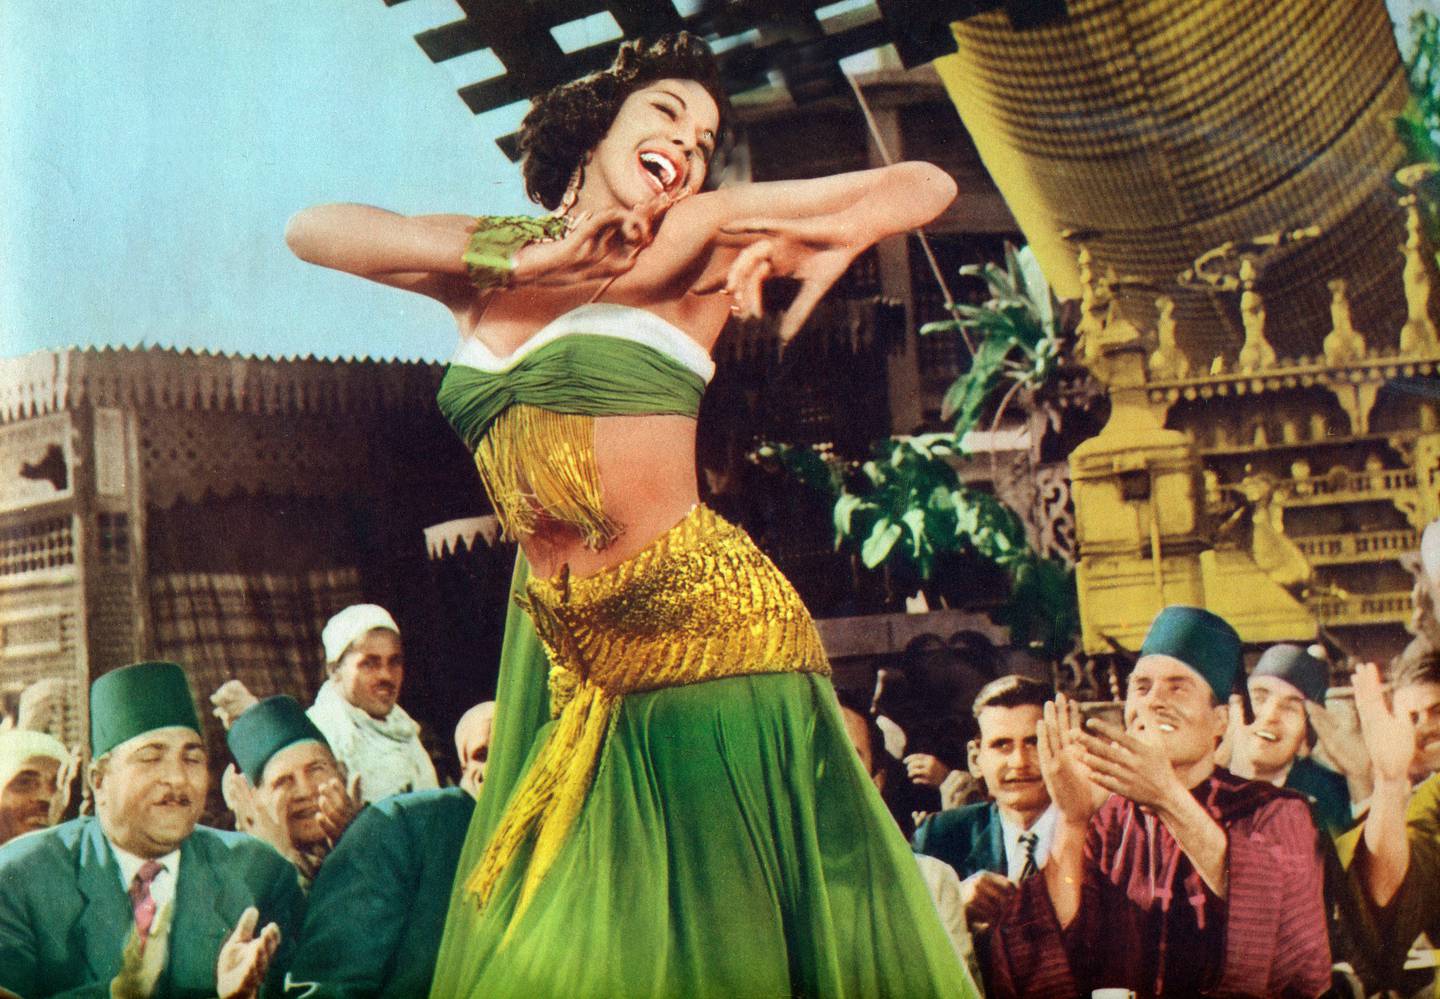 Abaza's wife Samia Gamal dancing in Valley of The Kings (1954). Alamy